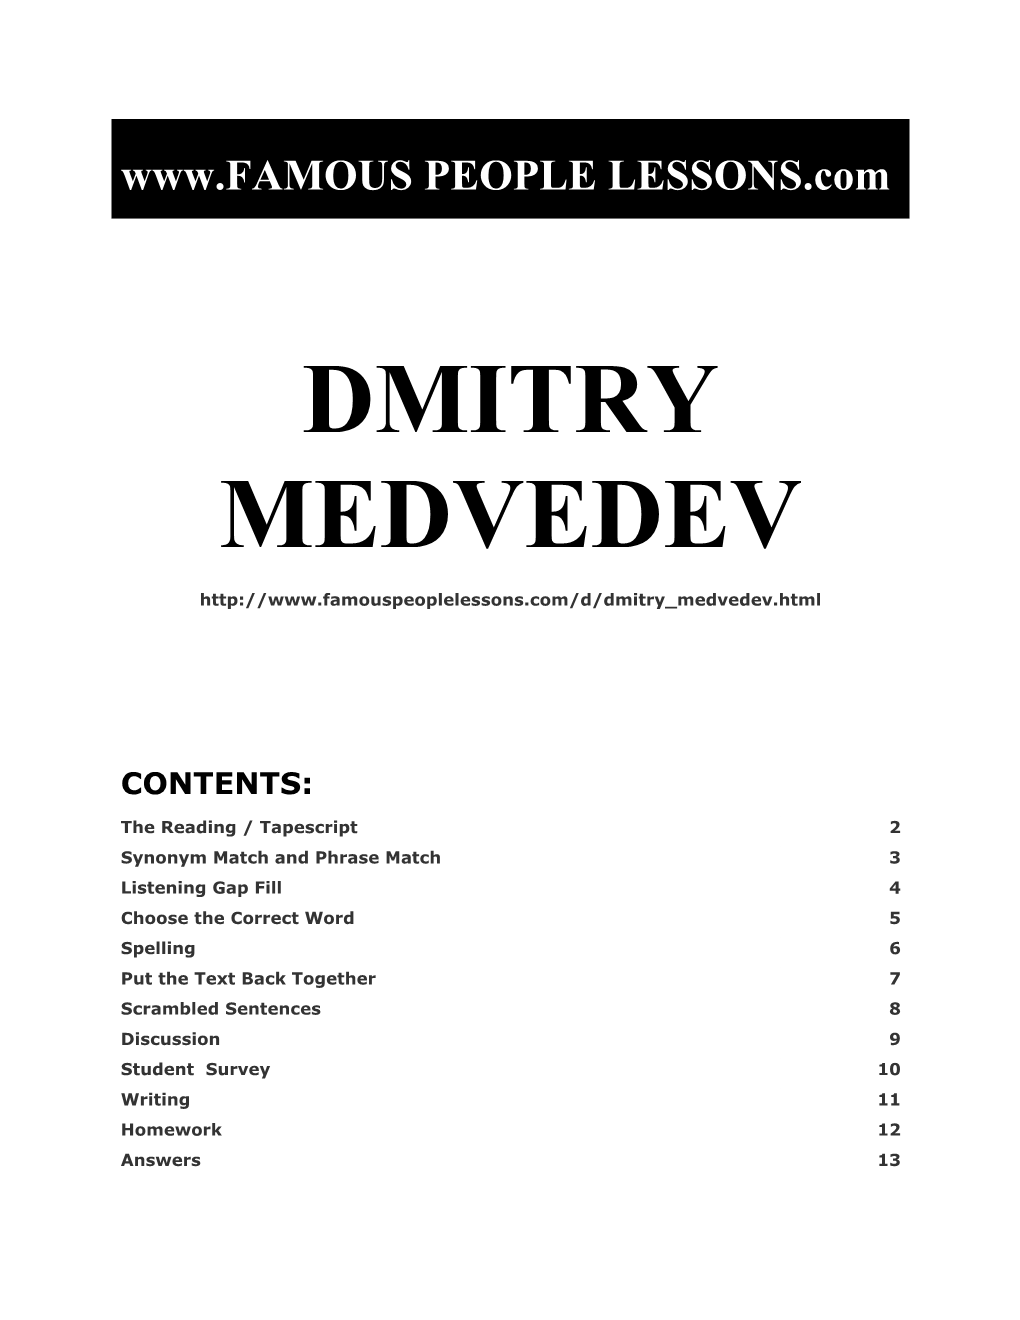 Famous People Lessons - Dmitry Medvedev